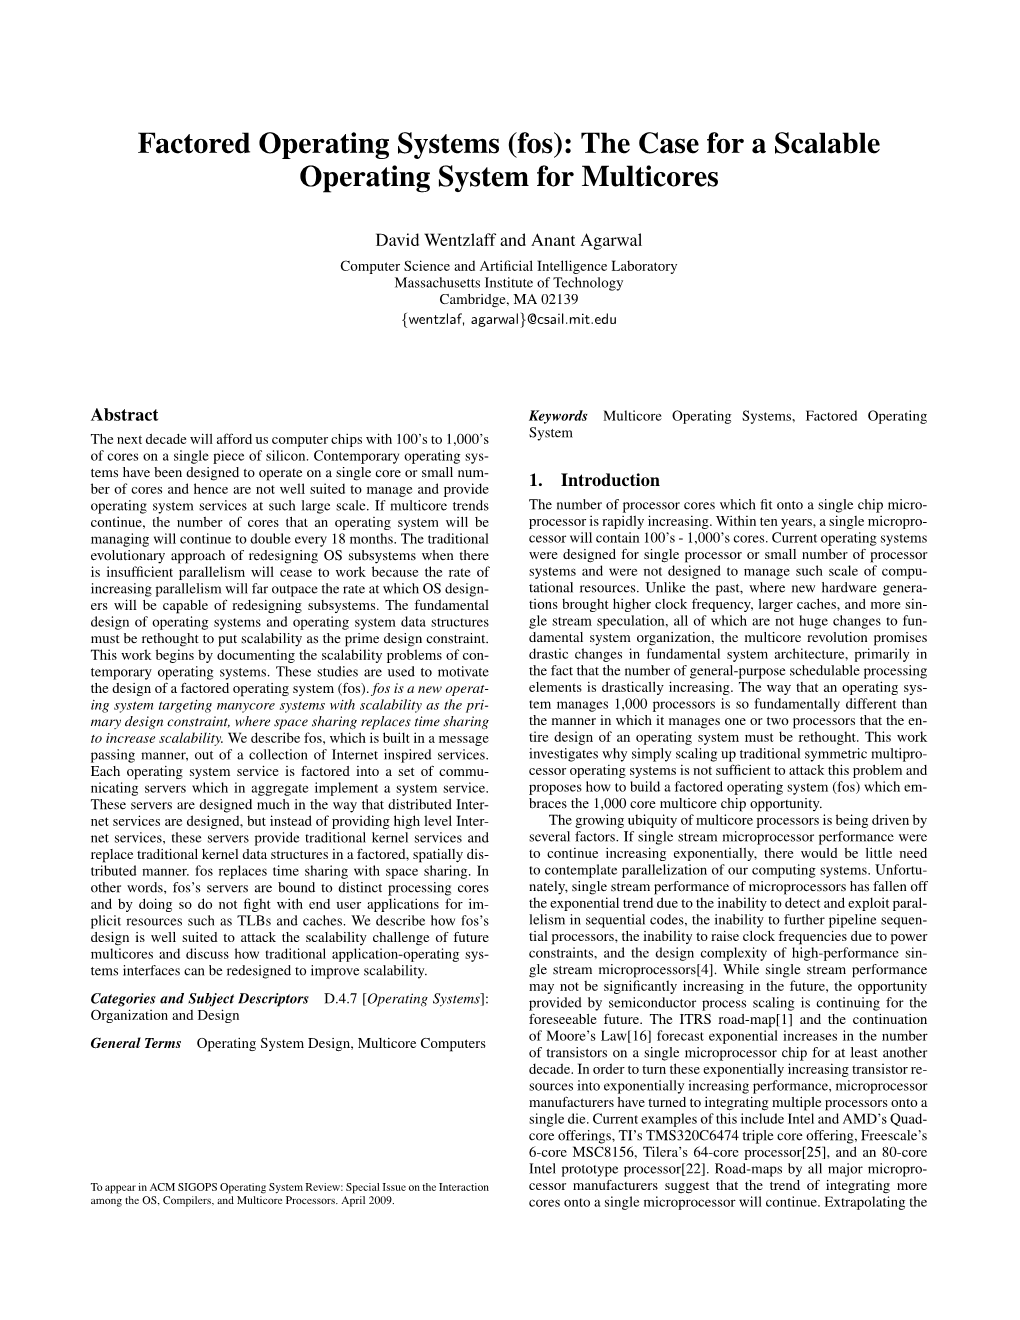 (Fos): the Case for a Scalable Operating System for Multicores